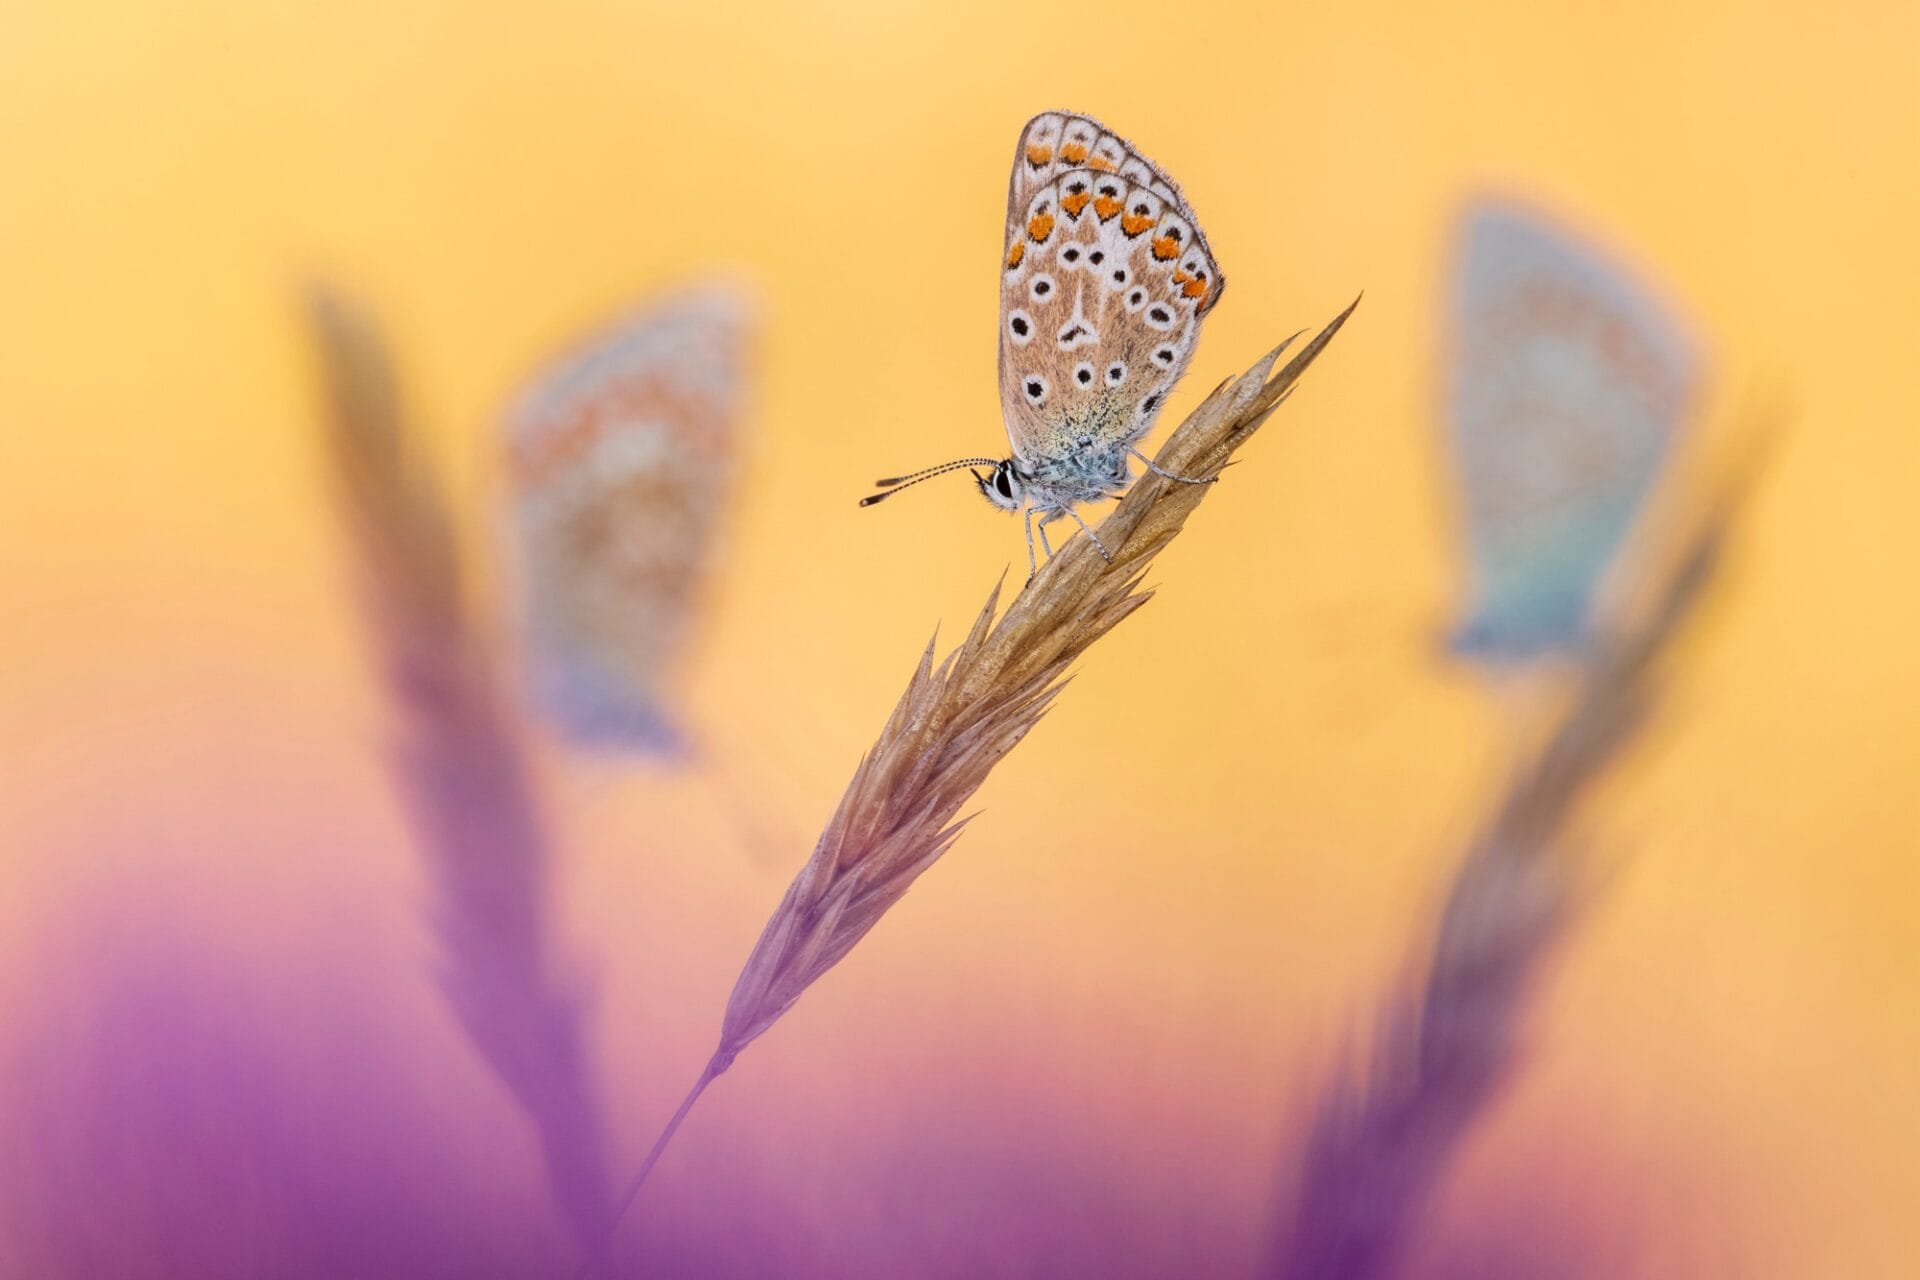 A common blue butterfly on a piece of grass with two more blurred in the background against a yellow backdrop